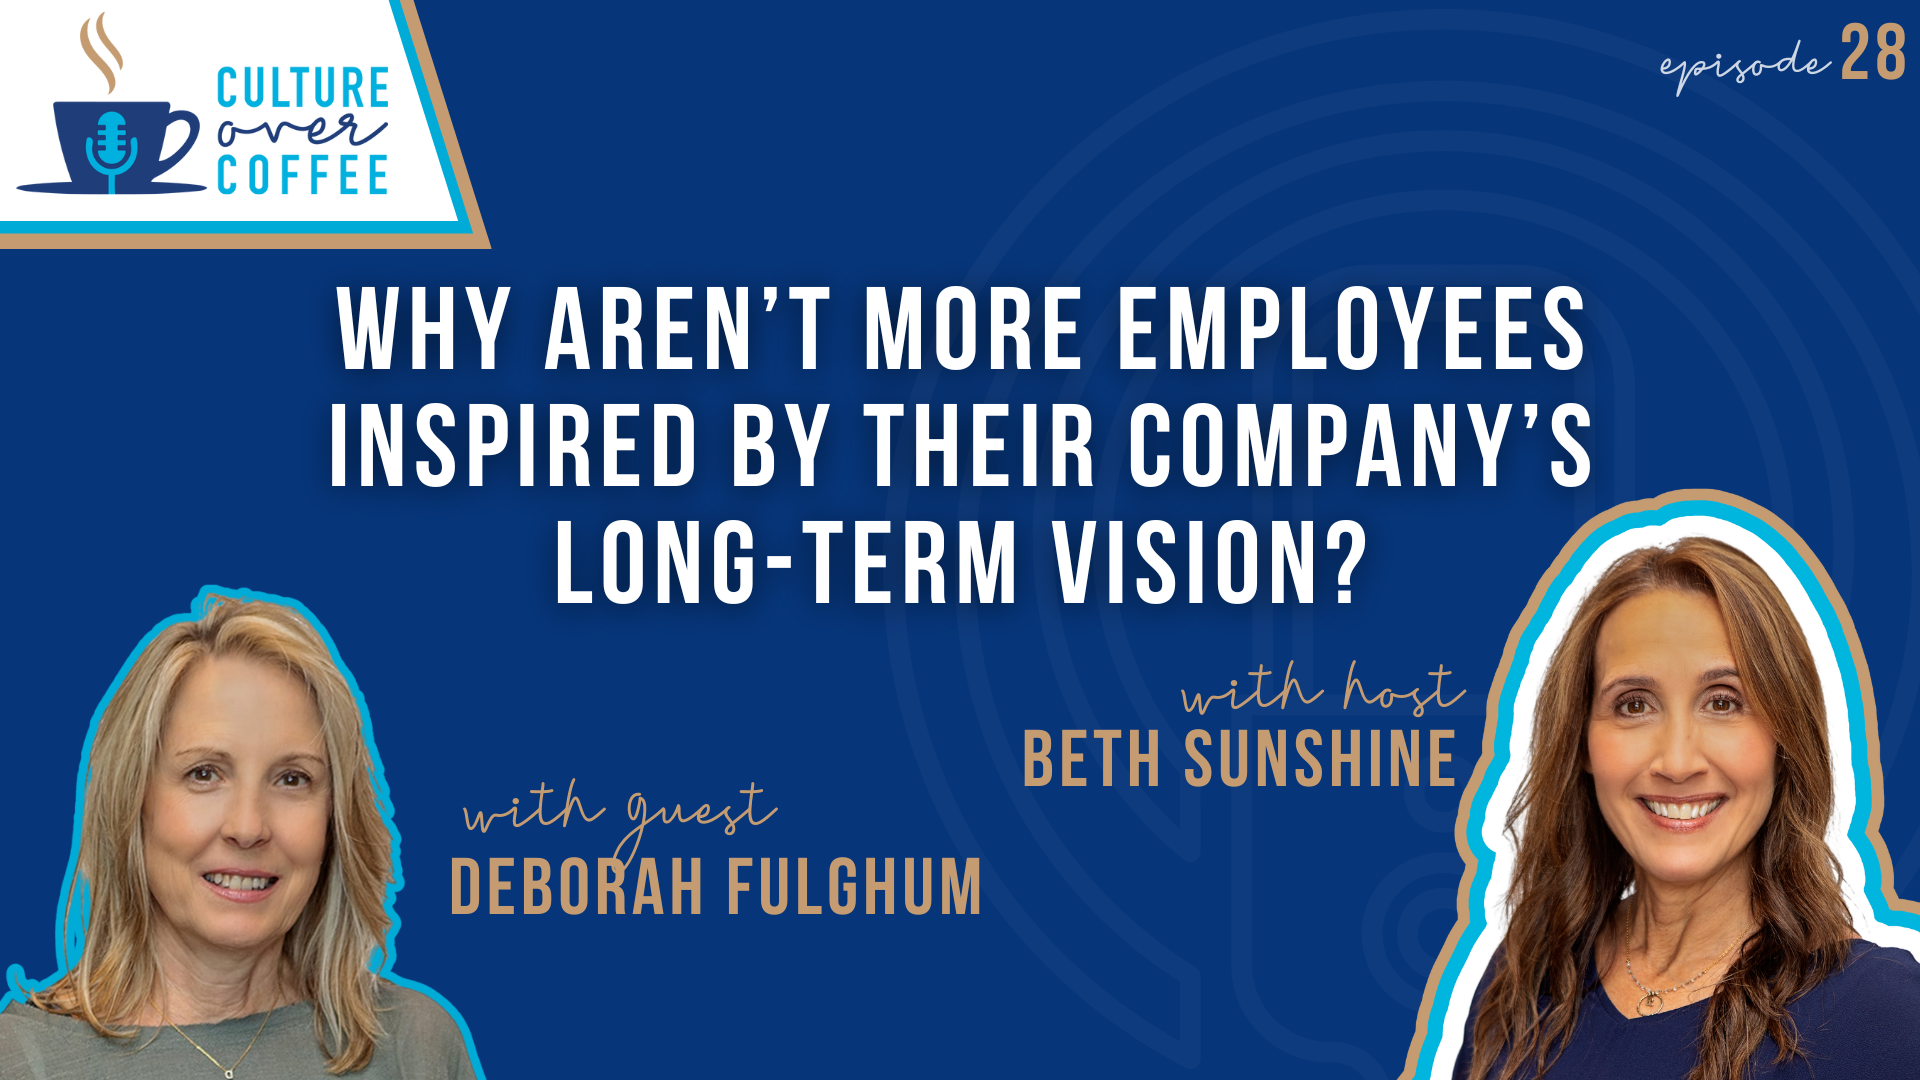 Why Aren’t More Employees Inspired by Their Company’s Long-Term Vision? With Deborah Fulghum